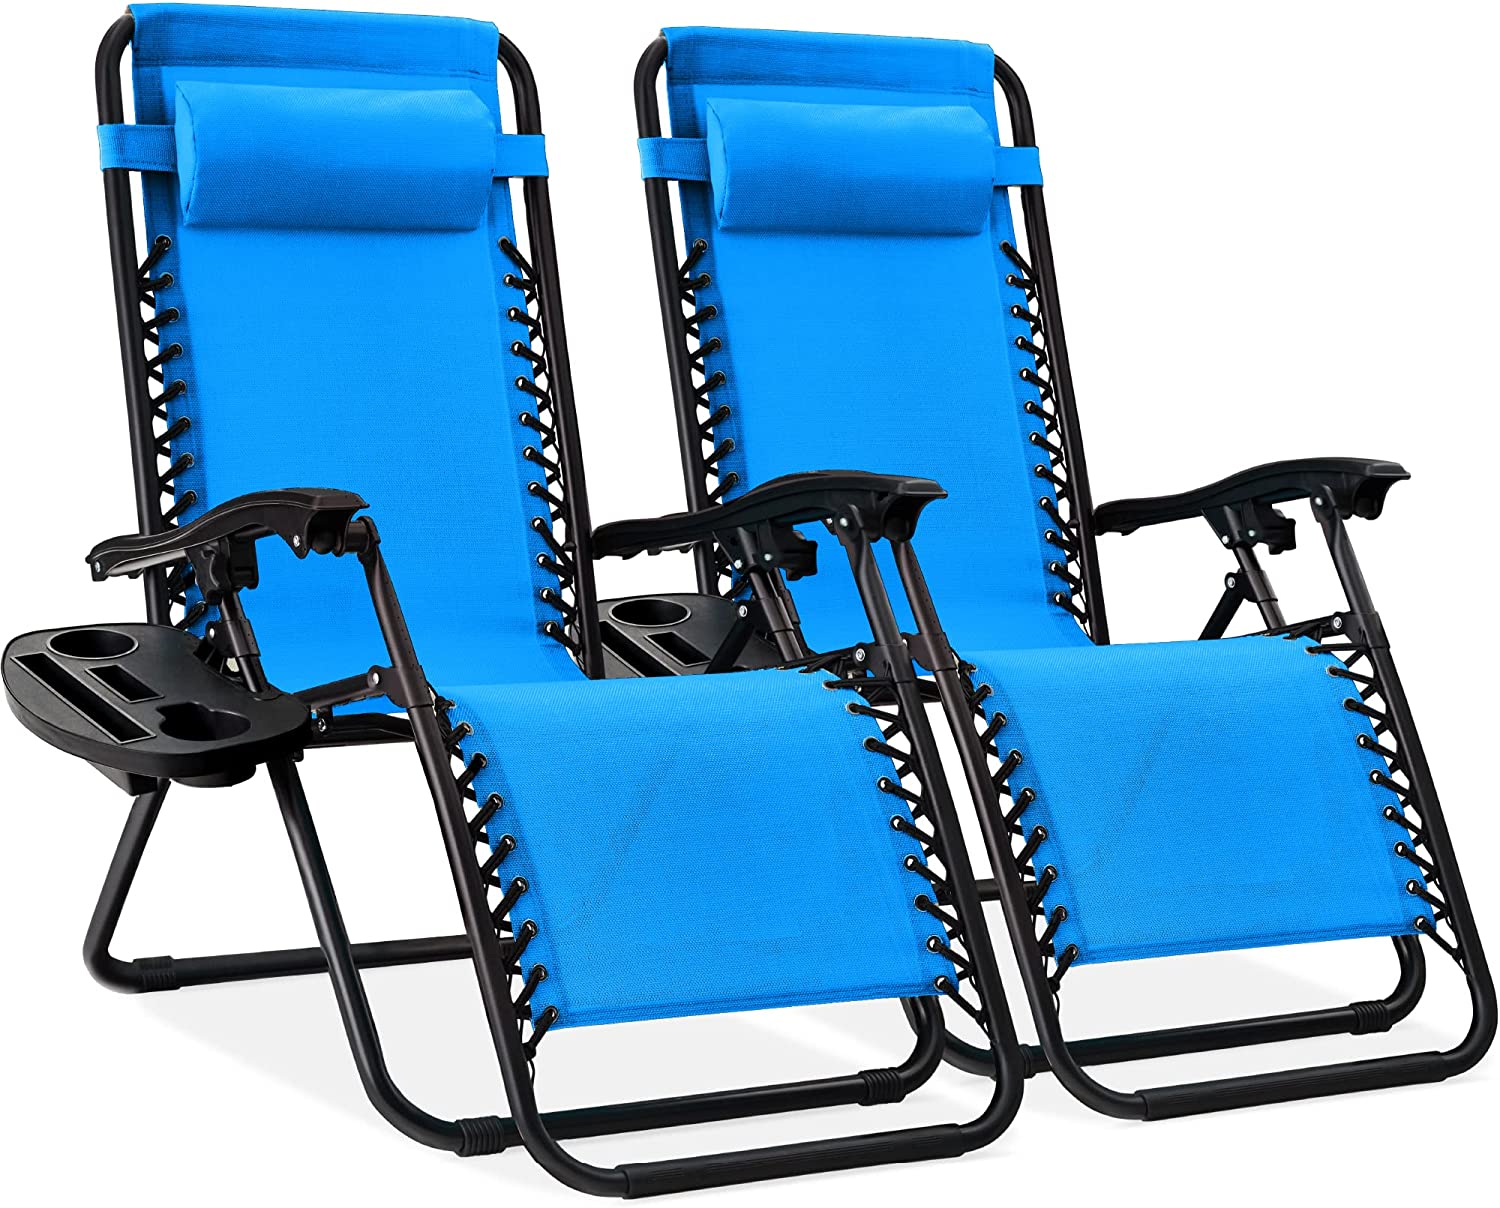 In-pool Lounge Chairs